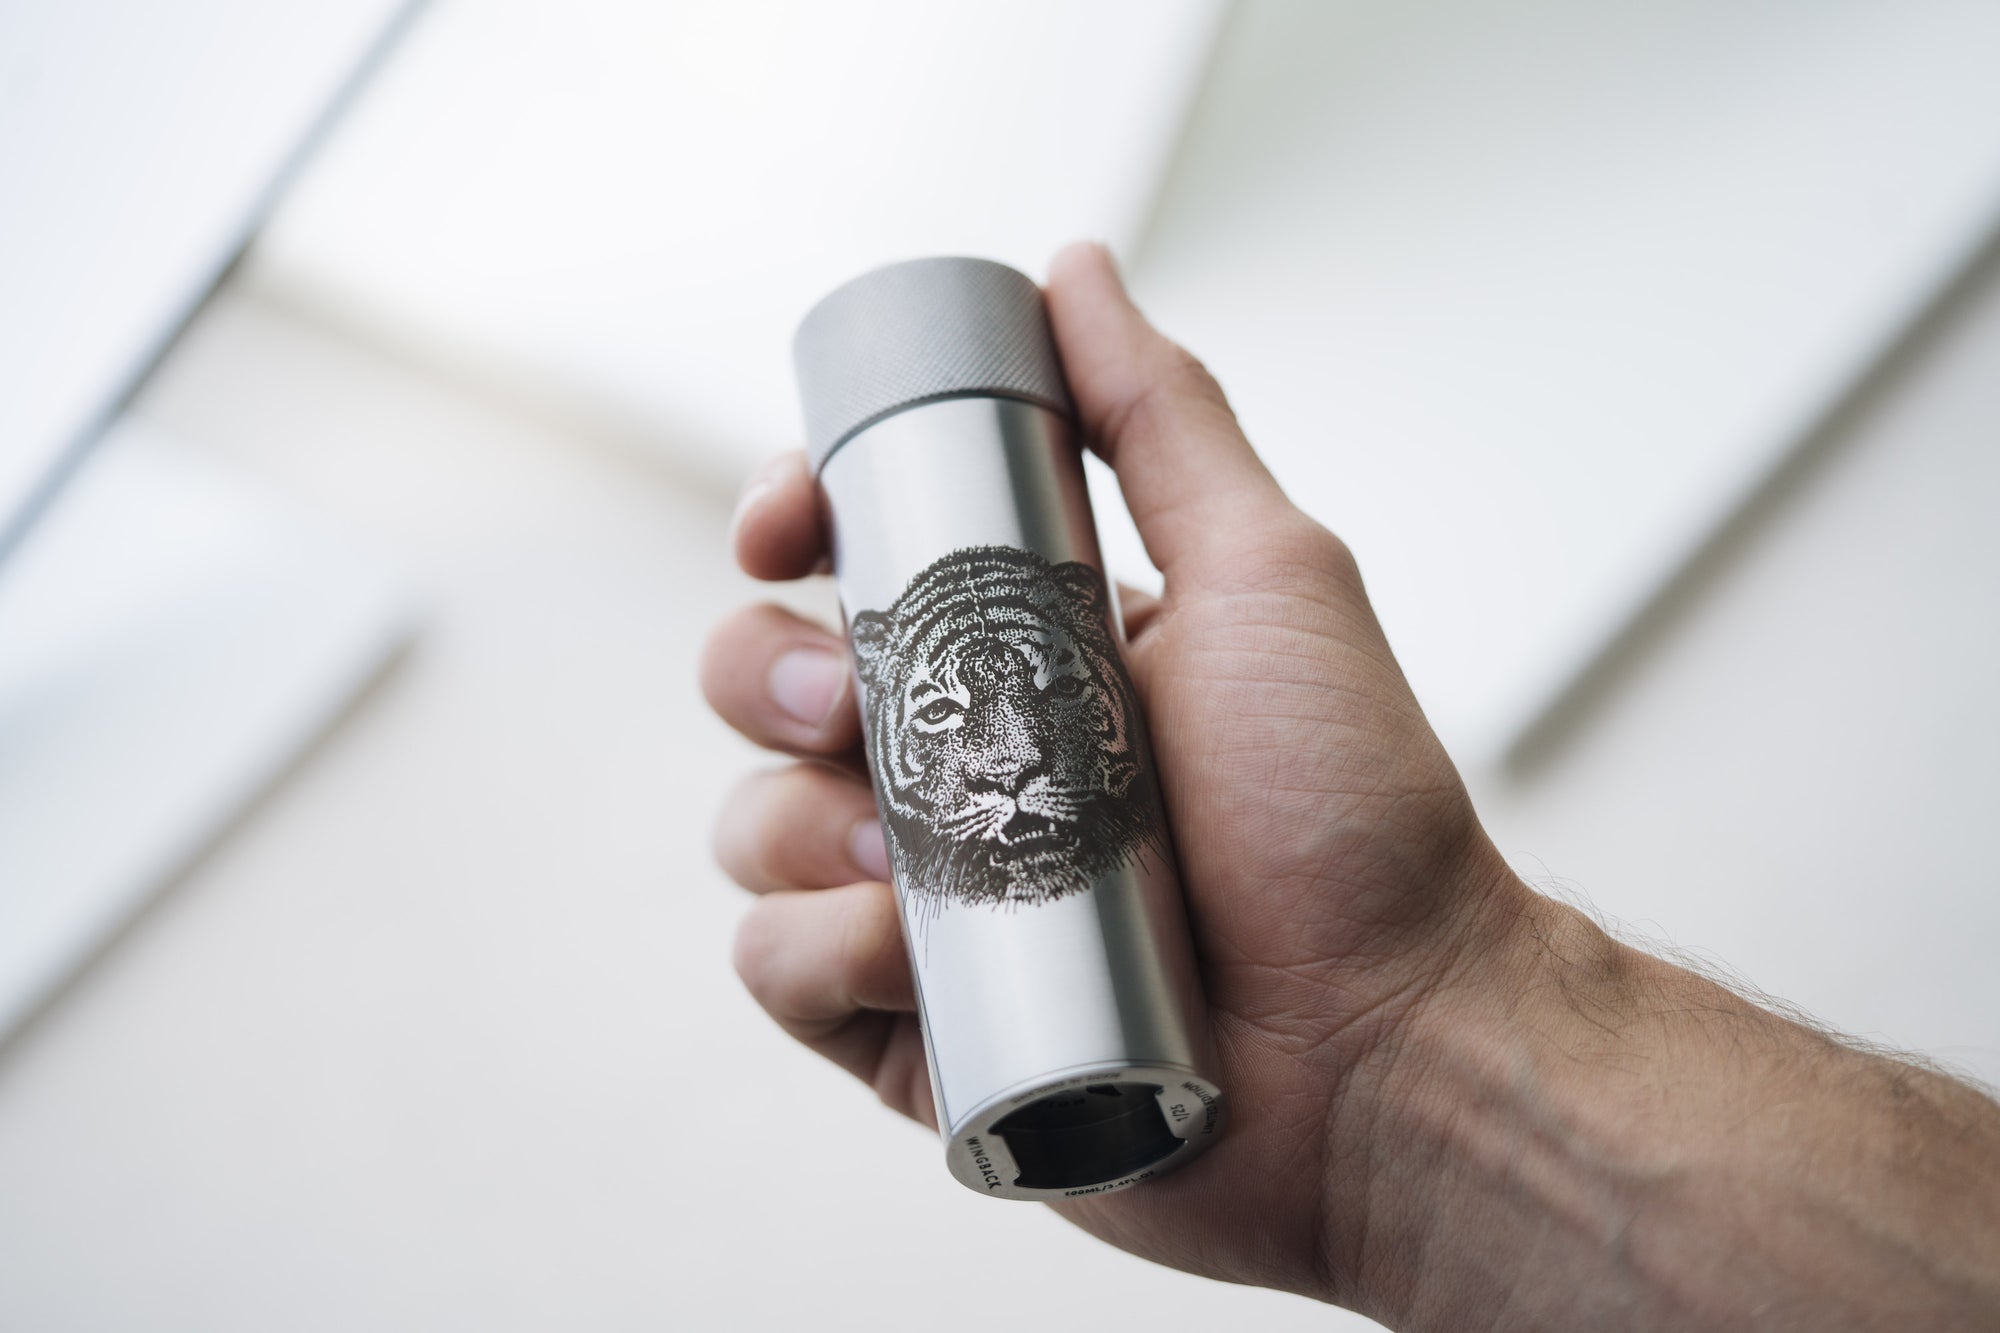 5AM Illustration X Wingback - Artist Conservation Series of Tiger illustration on a stainless steel hip flask